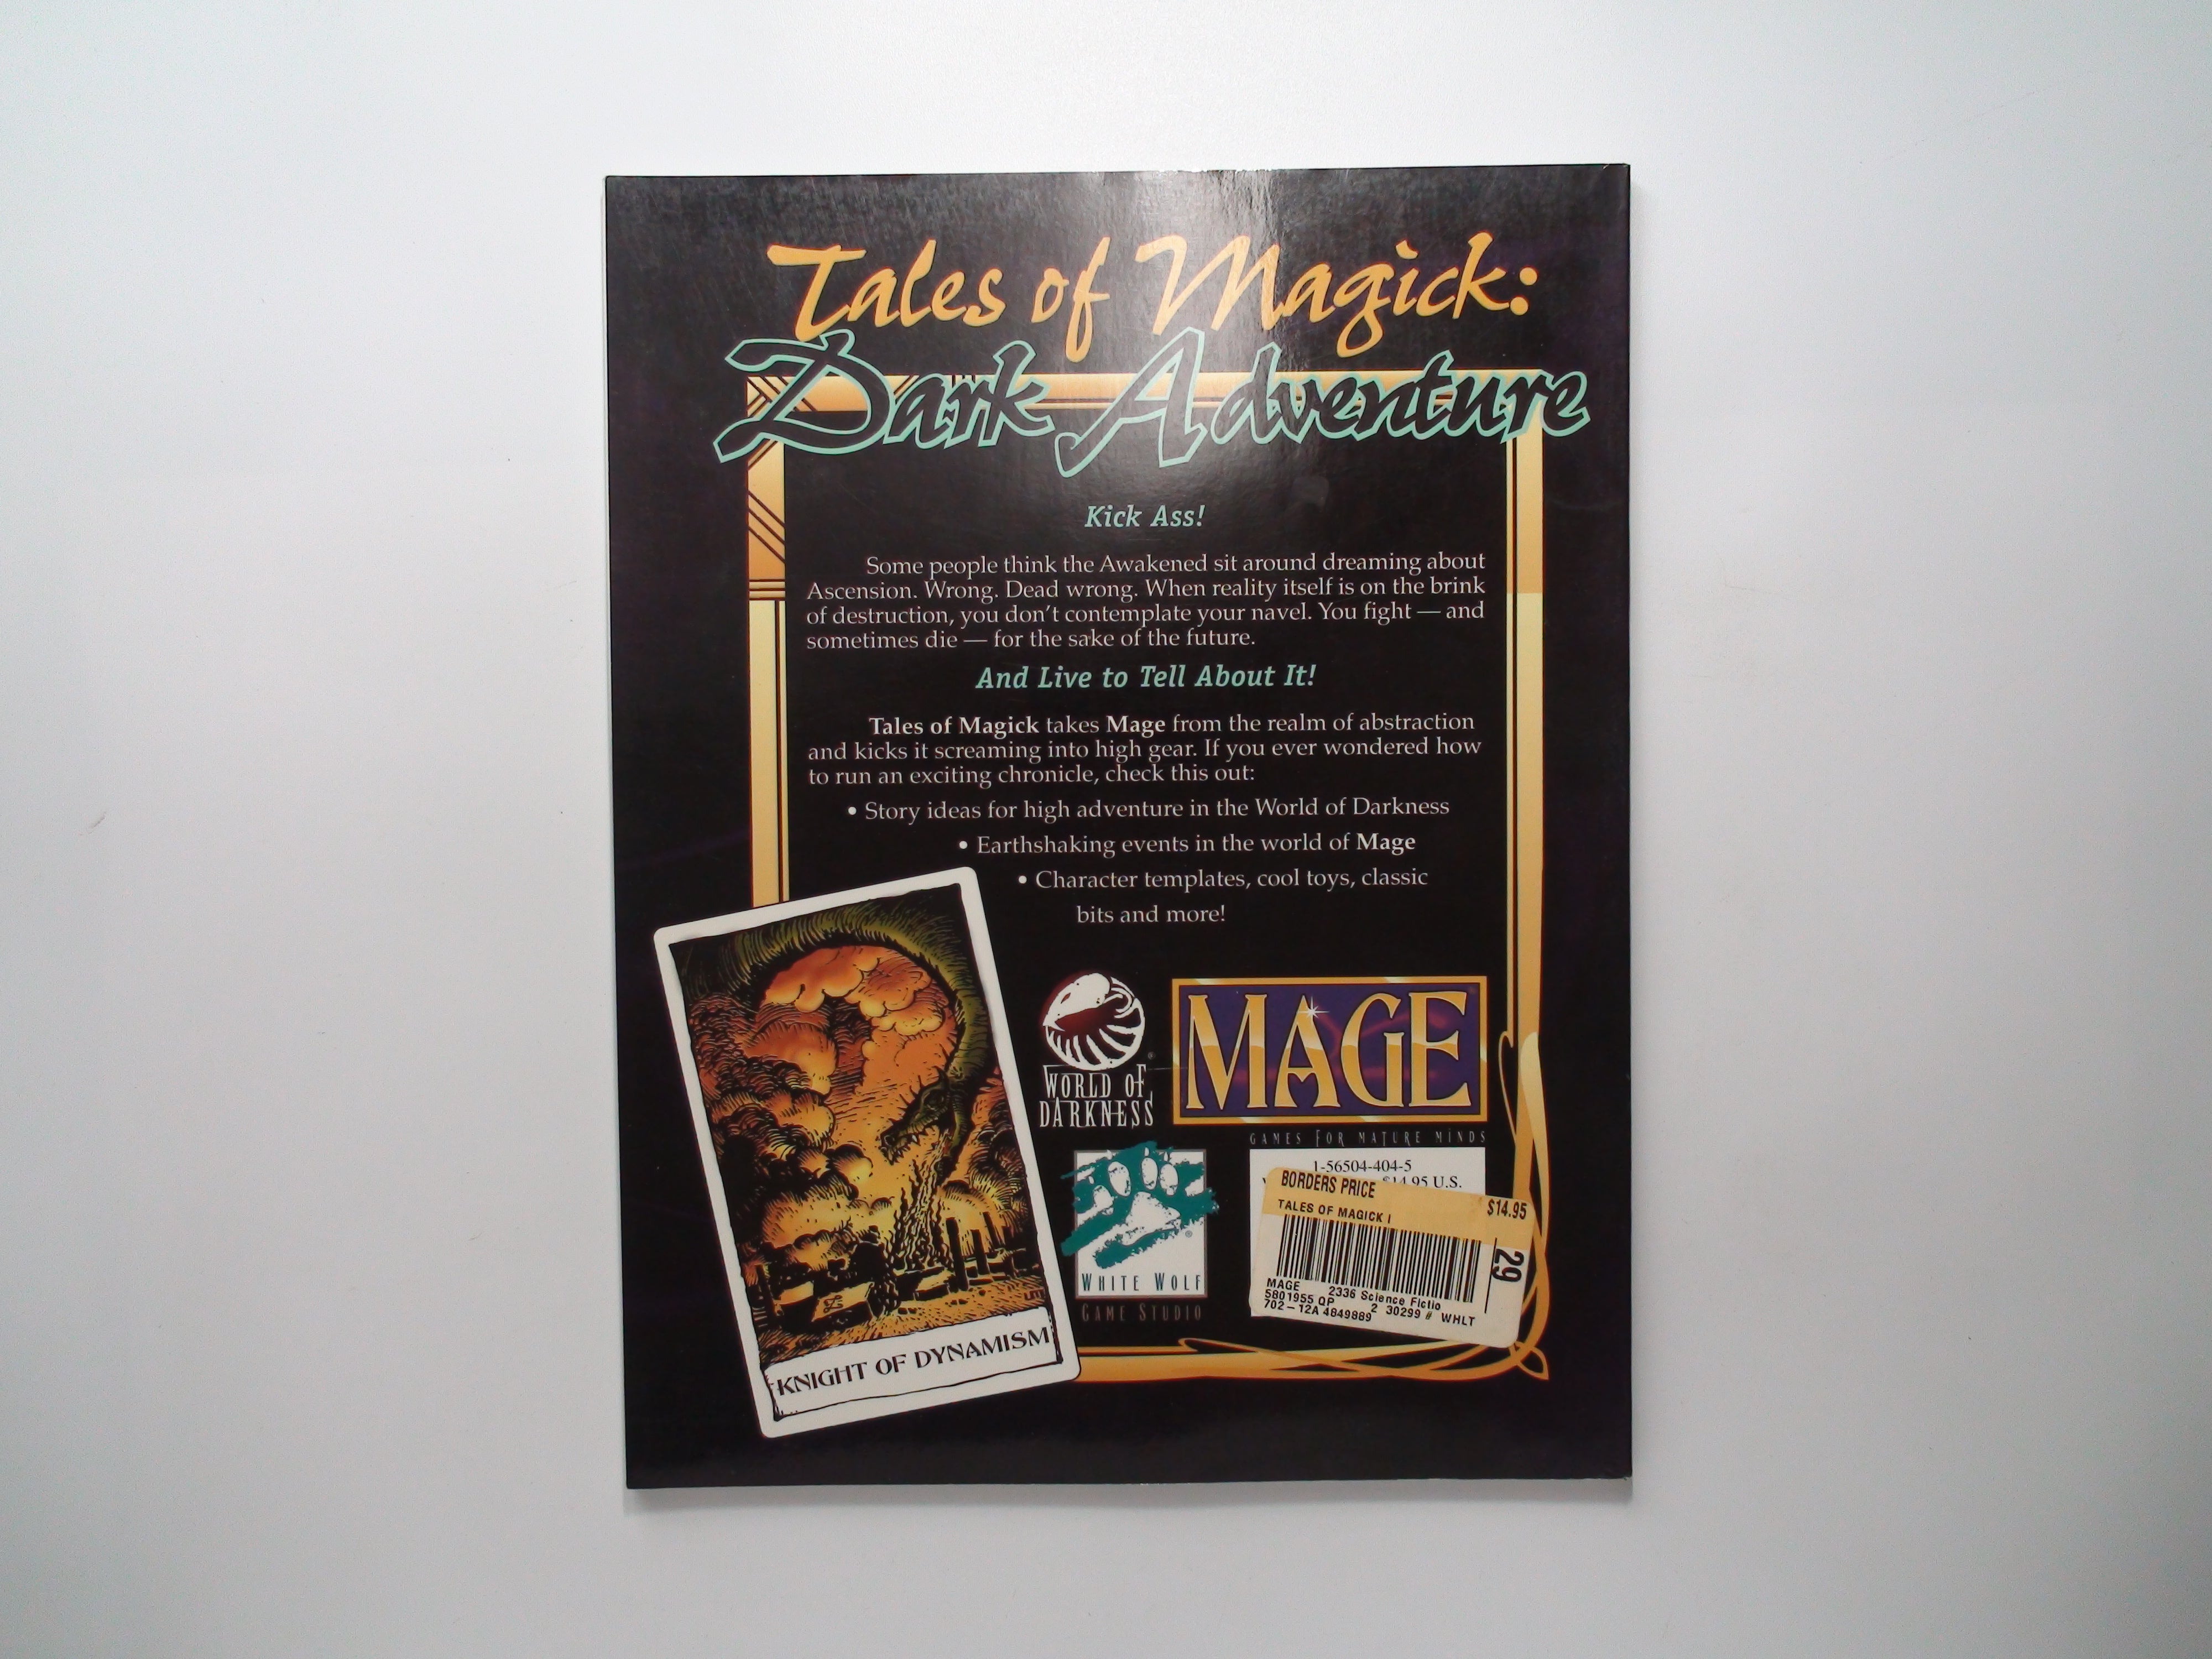 Tales of Magick, Dark Adventure, WoD, White Wolf, Mage The Ascension, 1999